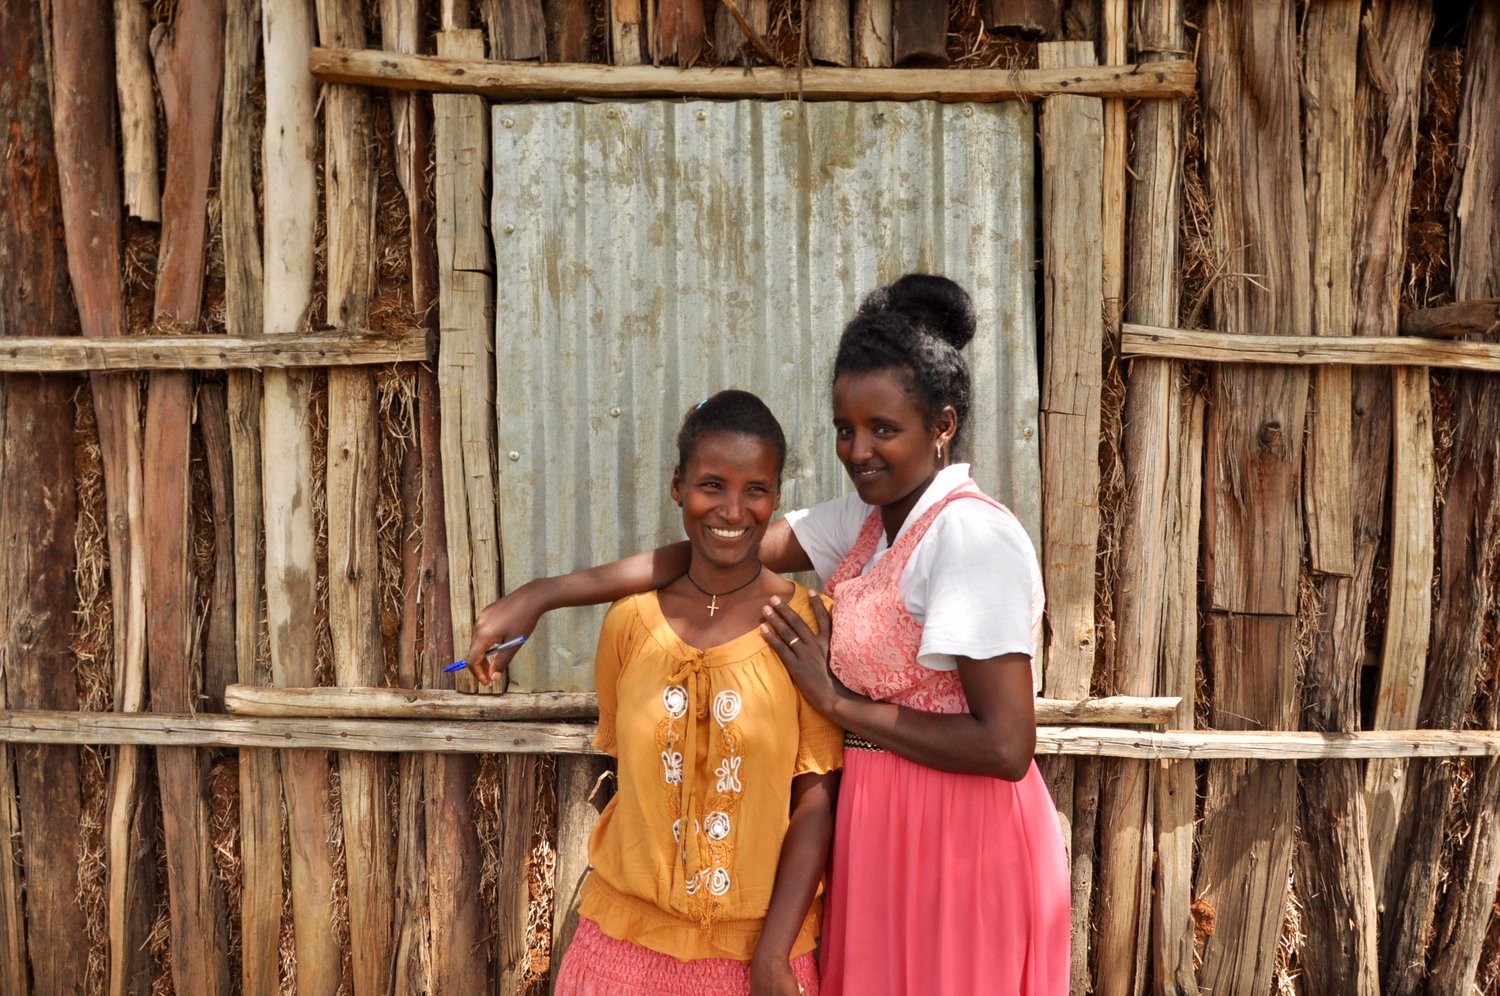  Through the HCD process, young Ethiopian girls to us that they wanted their children to have better quality lives—a factor that leads them to desire financial stability and smaller families. 